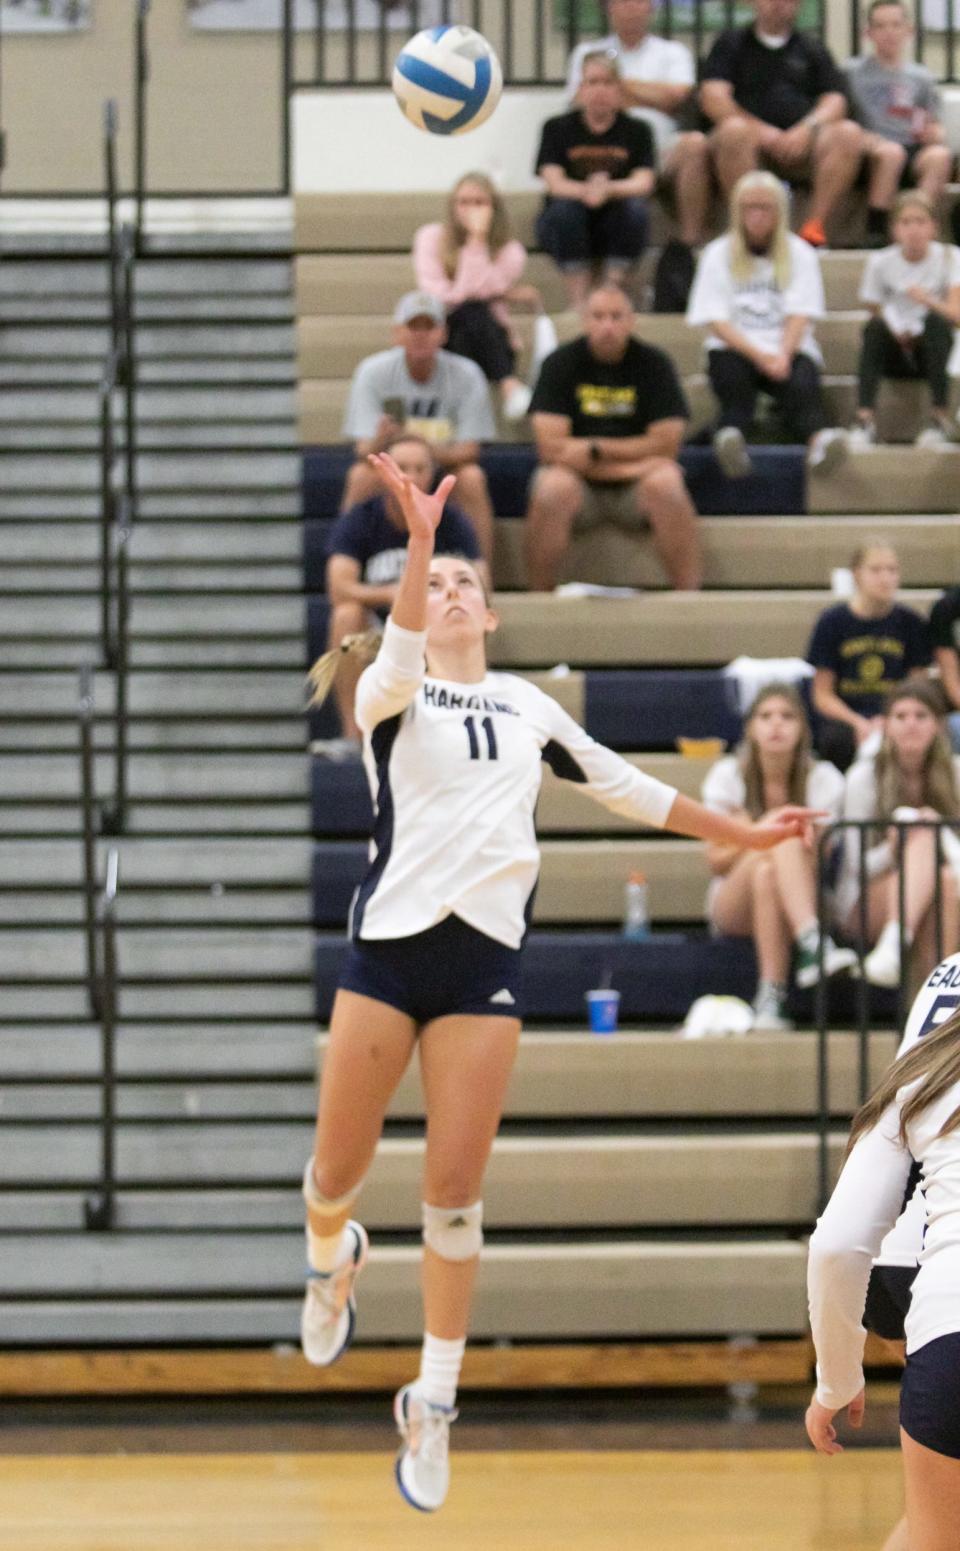 Hartland Eagle Cameron Herman goes up for the ball at a volleyball match at Hartland High School Thursday, Sept. 8, 2022.